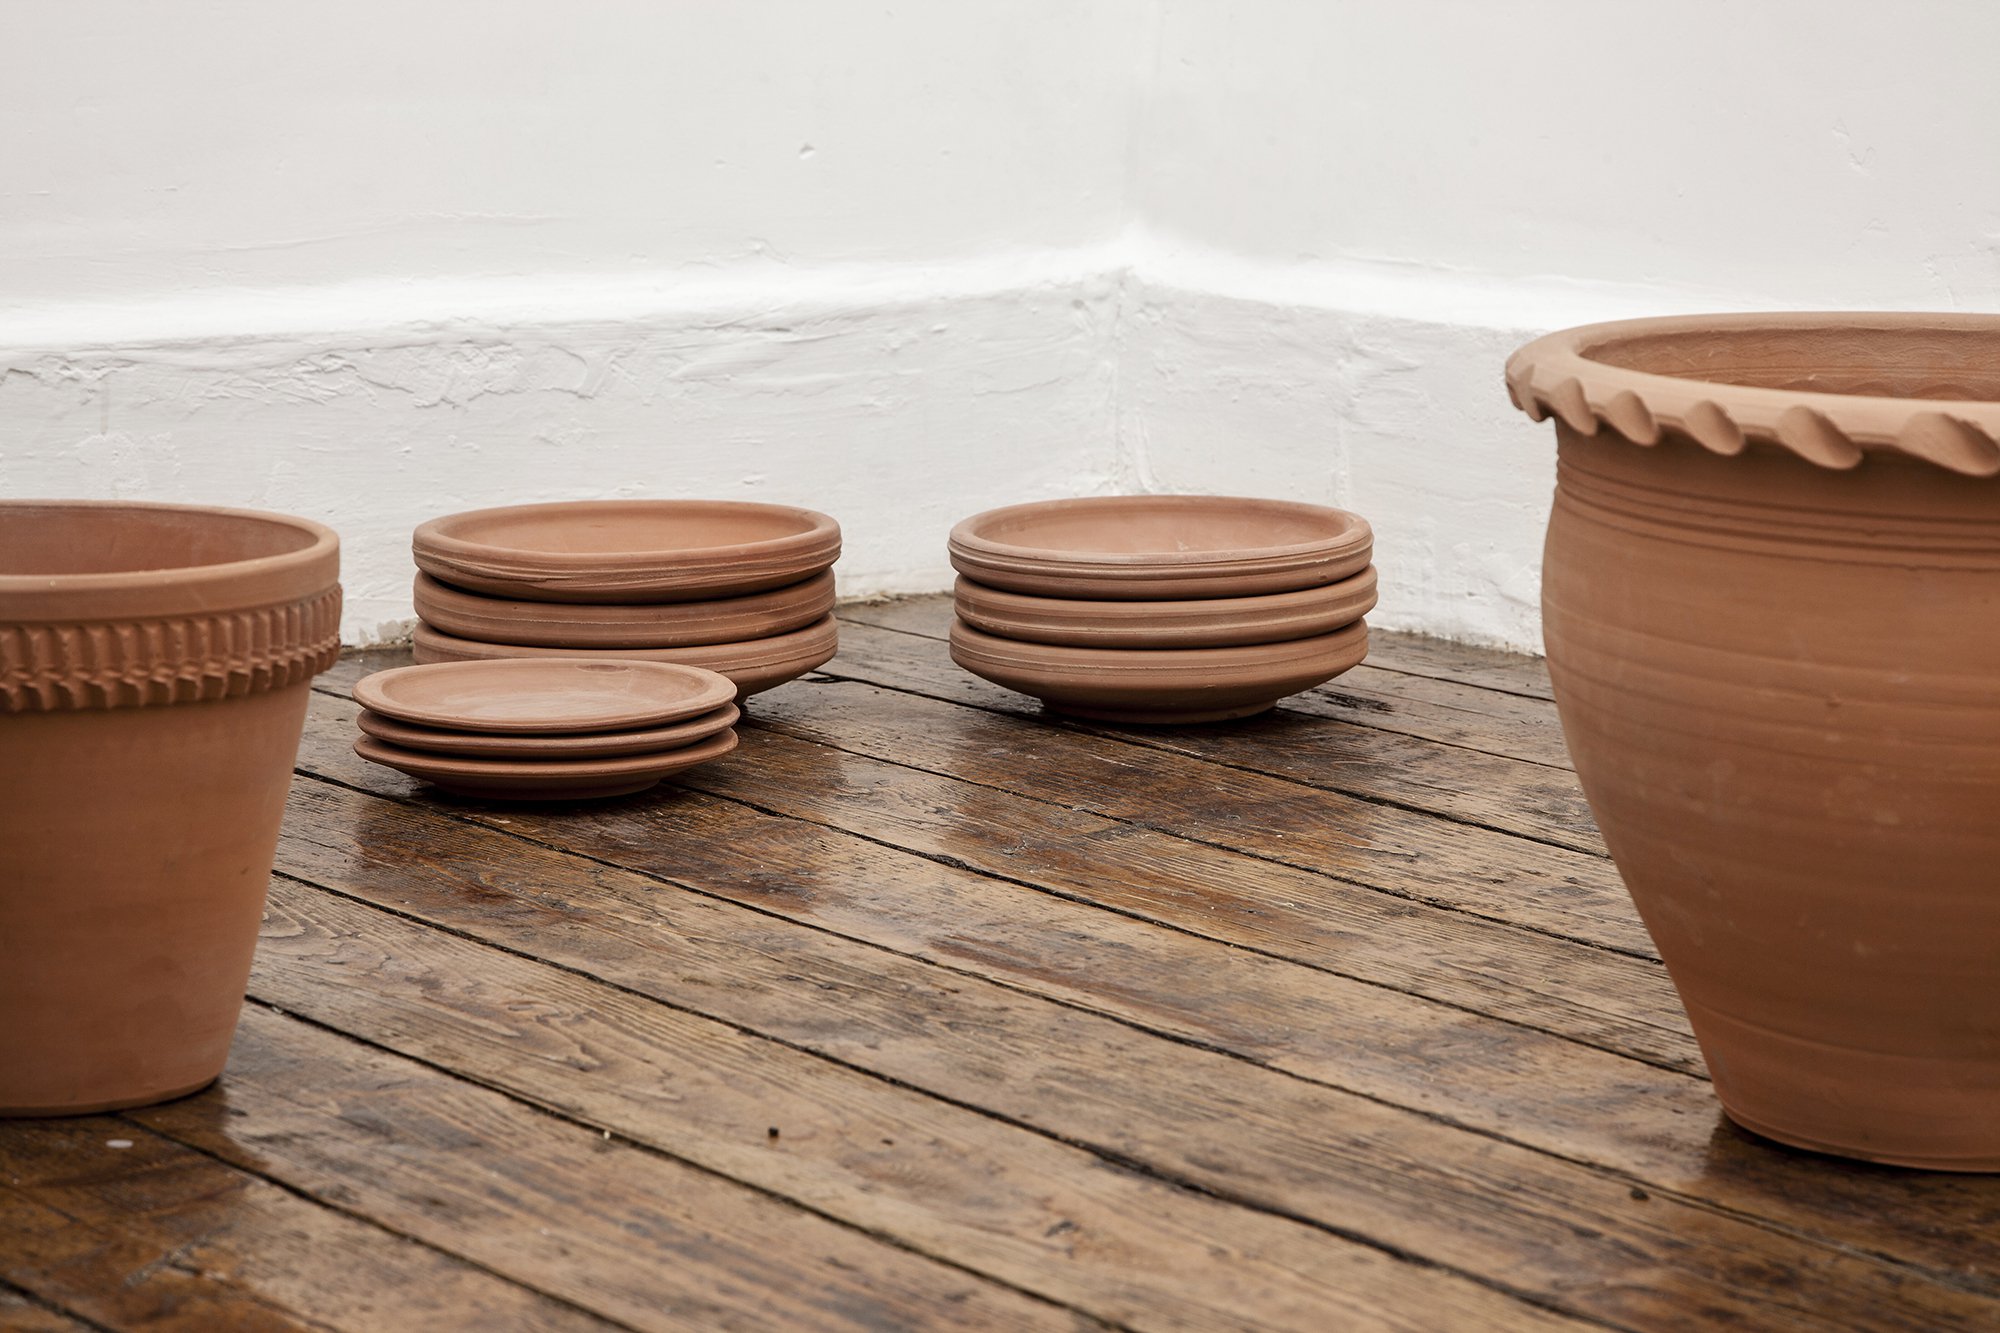 Christodoulos Panayiotou, Untitled, 9 ceramic pots and 9 ceramic plates, dimensions variable, 2012